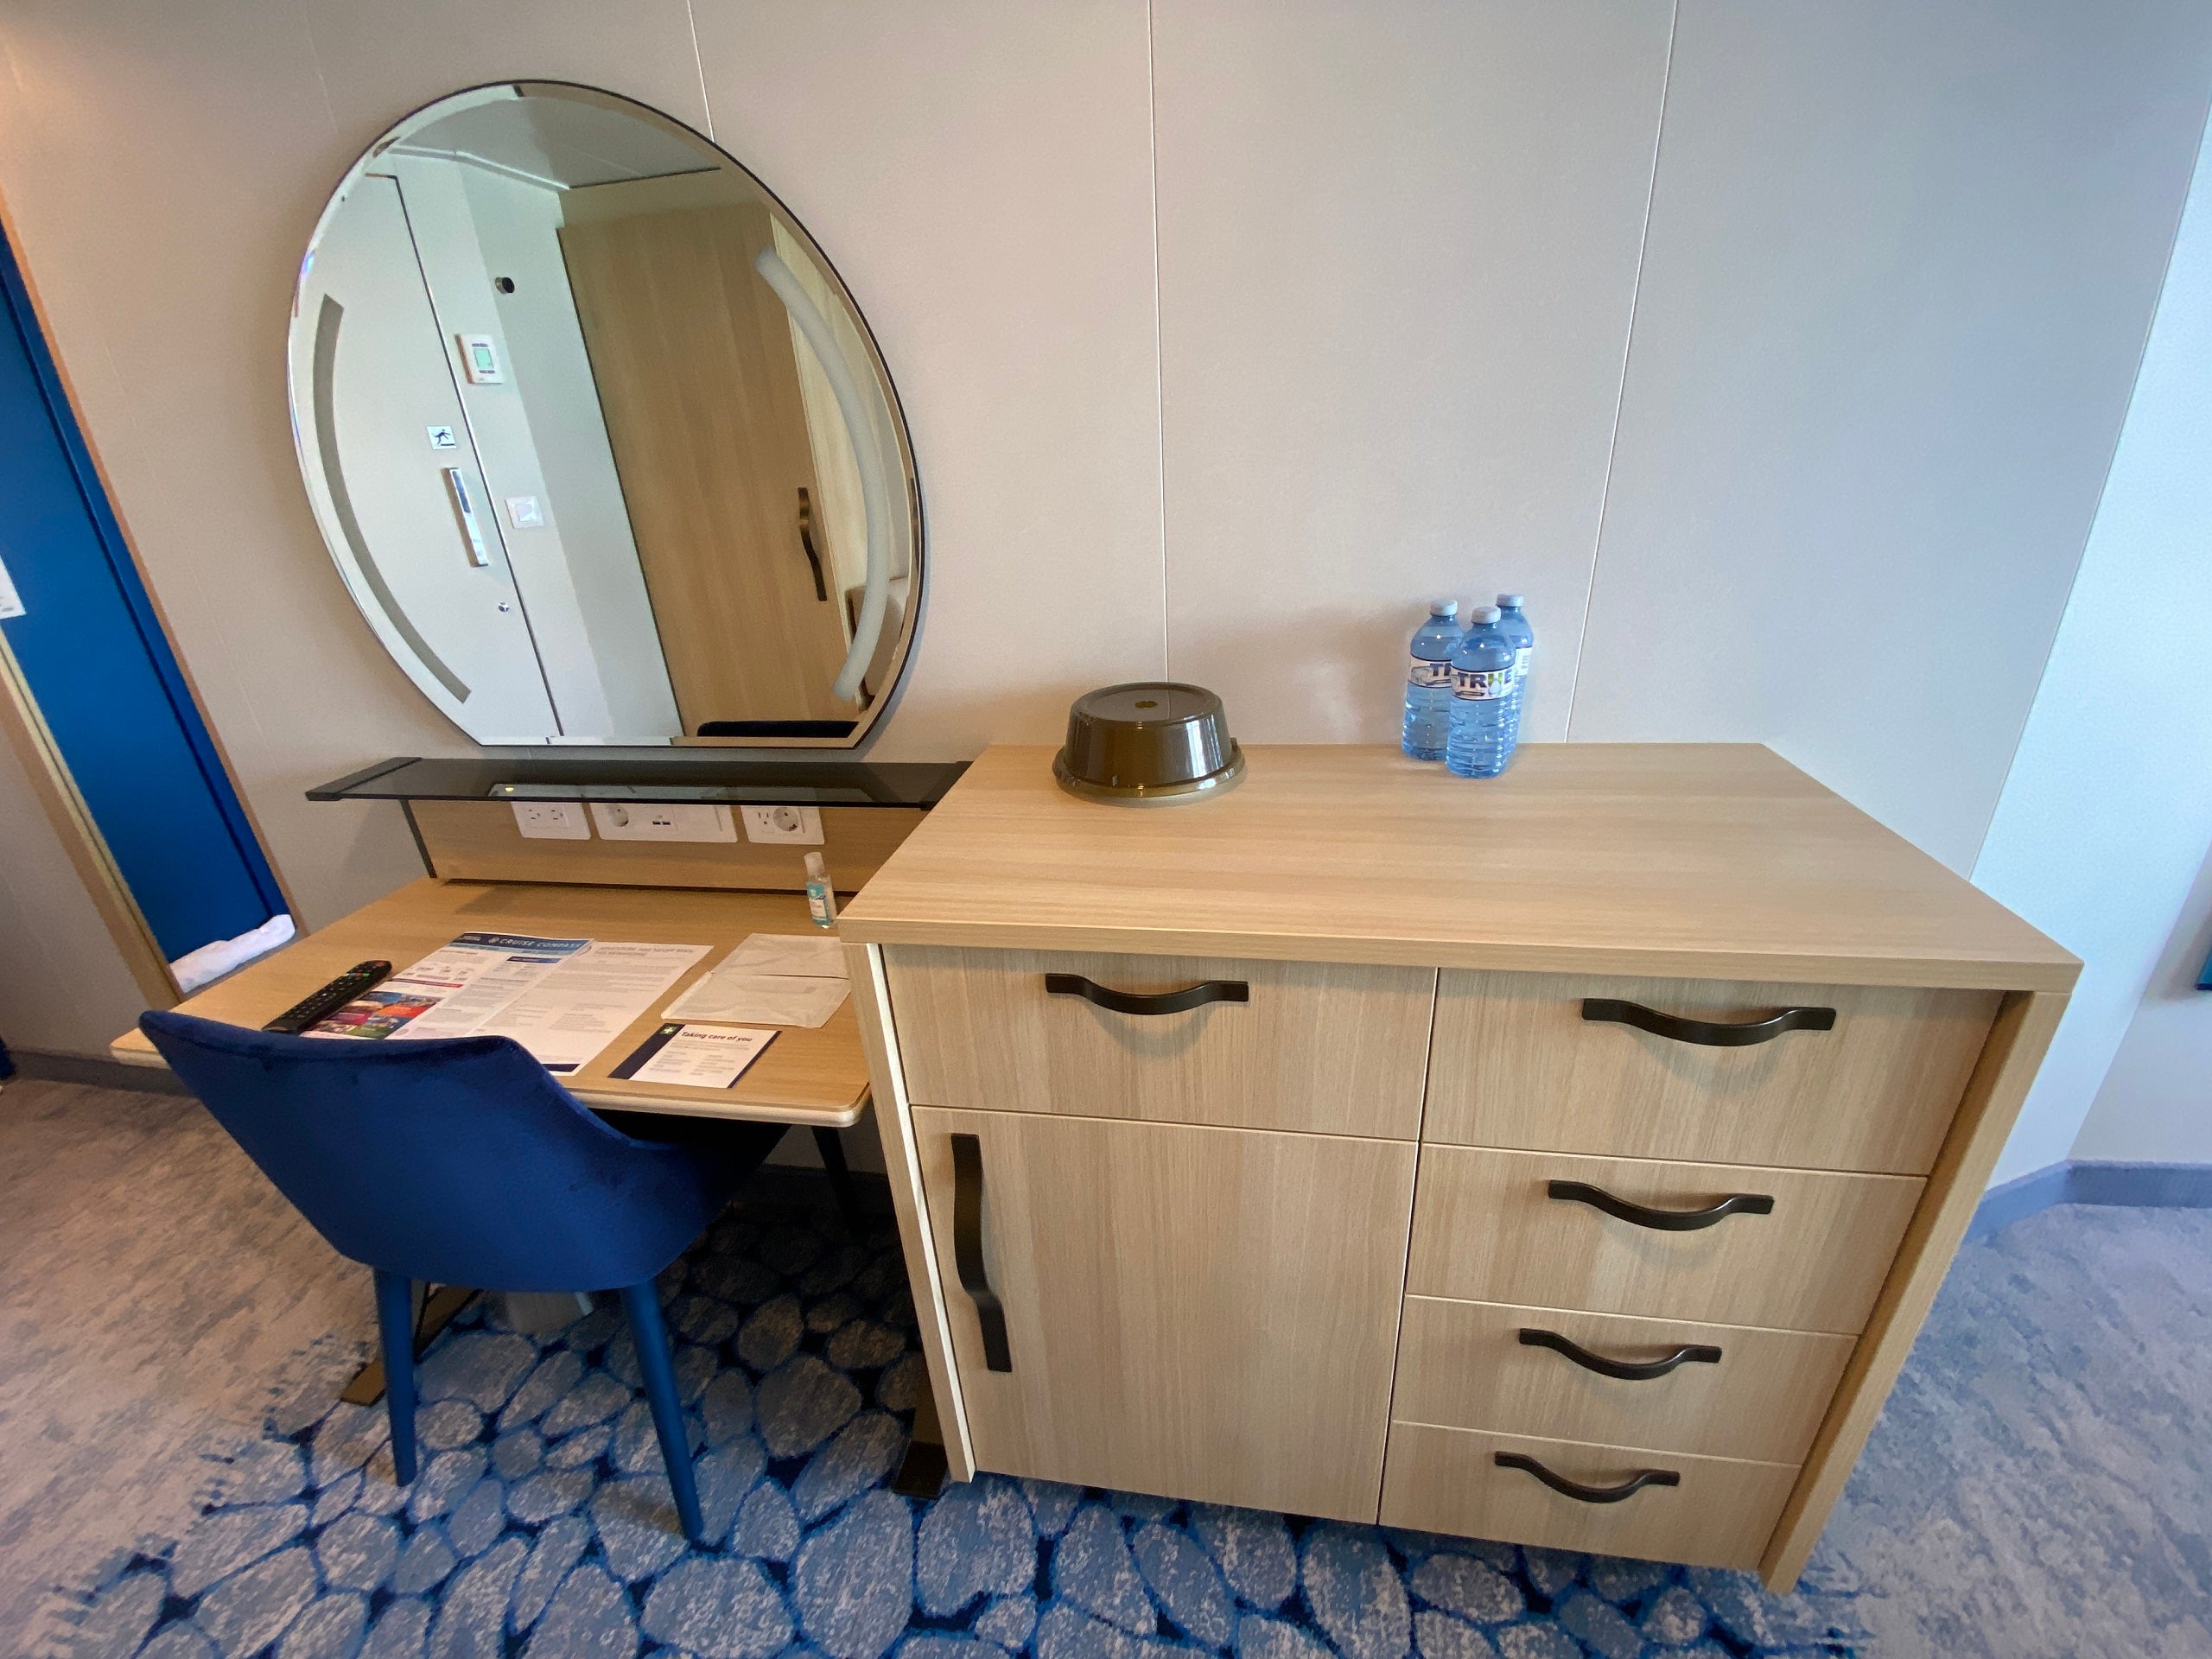 The desk/vanity area in a balcony cabin on Royal Caribbean's Wonder of the Seas.